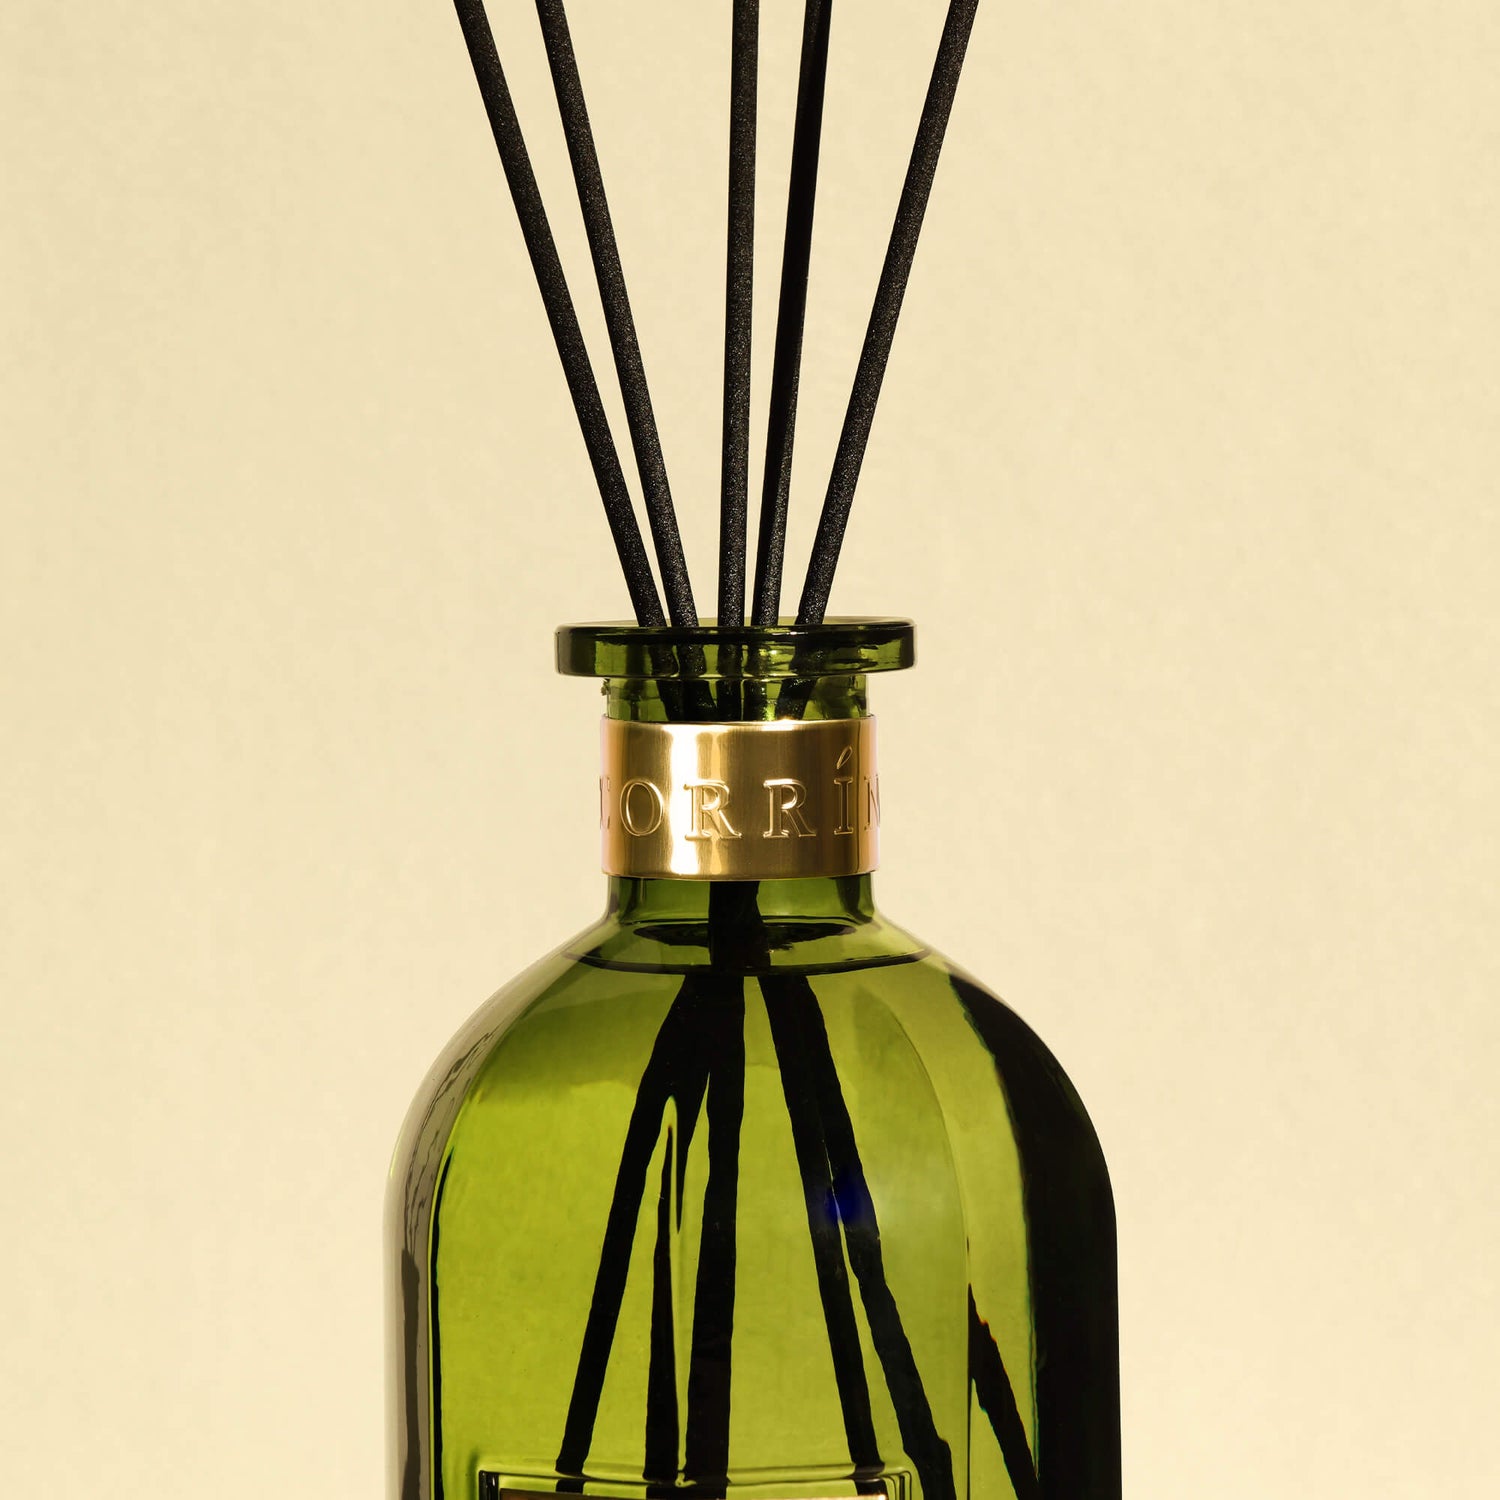 How to Use a Reed Diffuser Set?